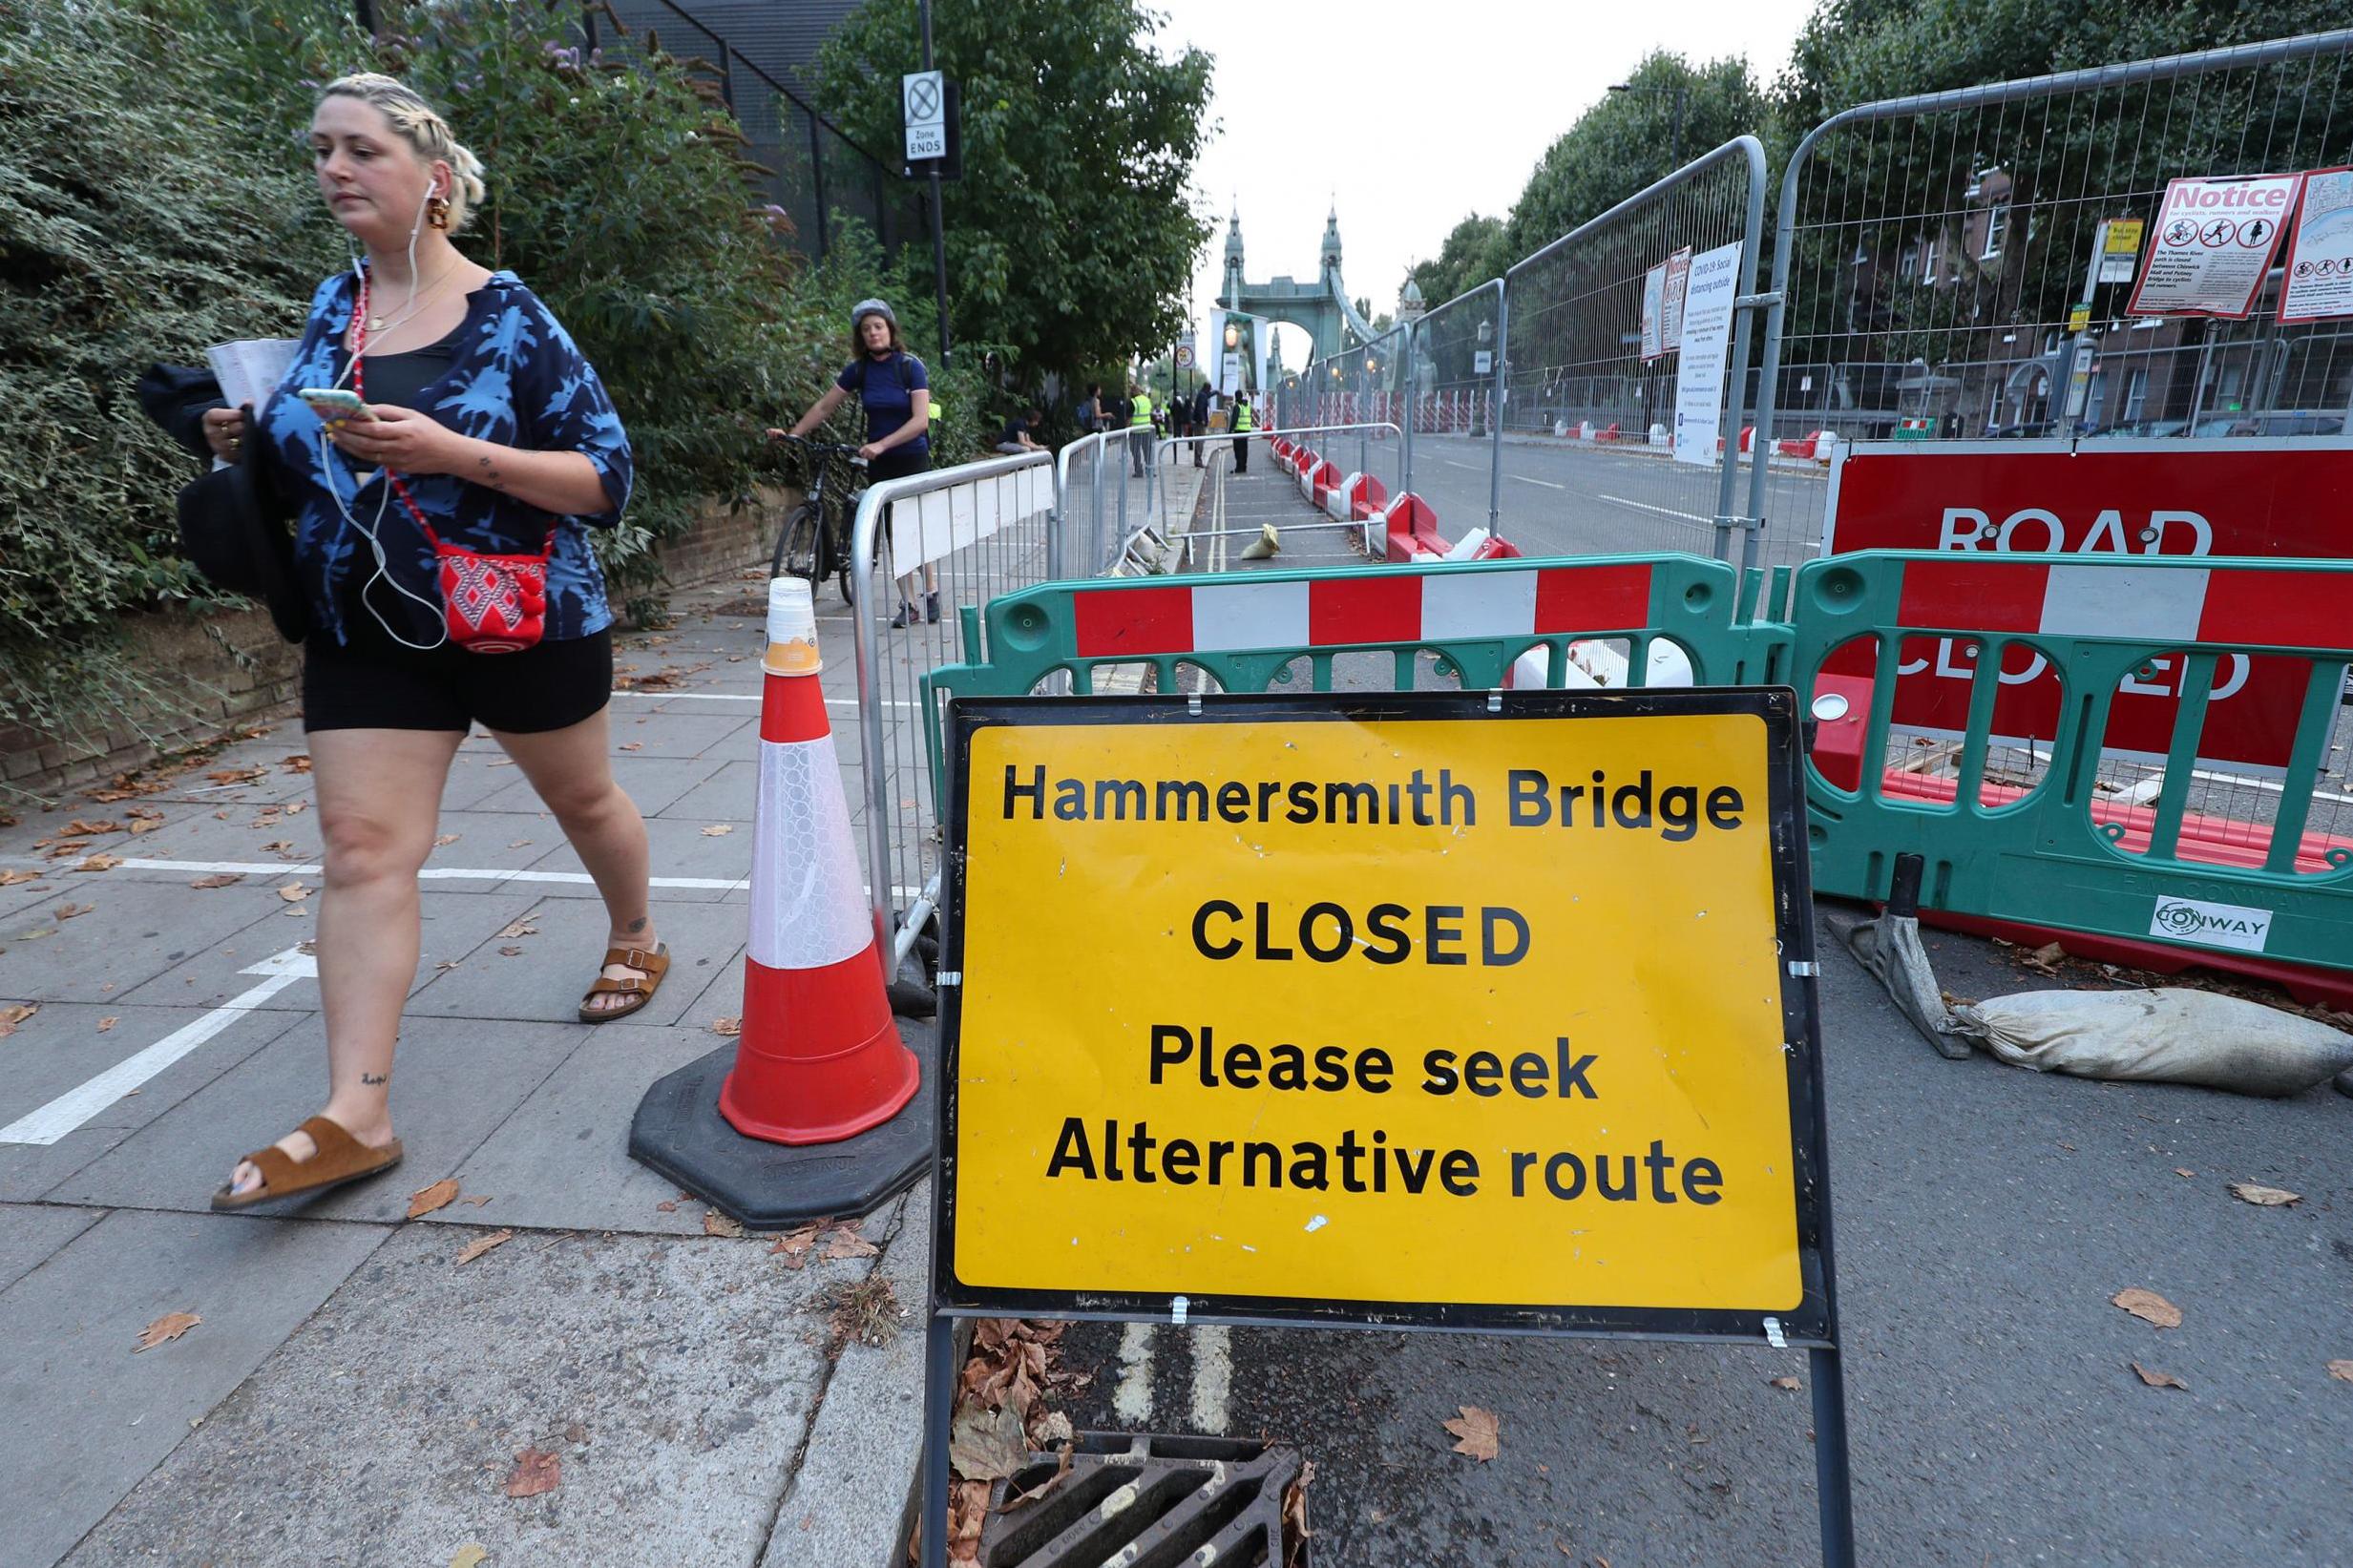 The bridge is closed to all traffic – pedestrians and cyclists included